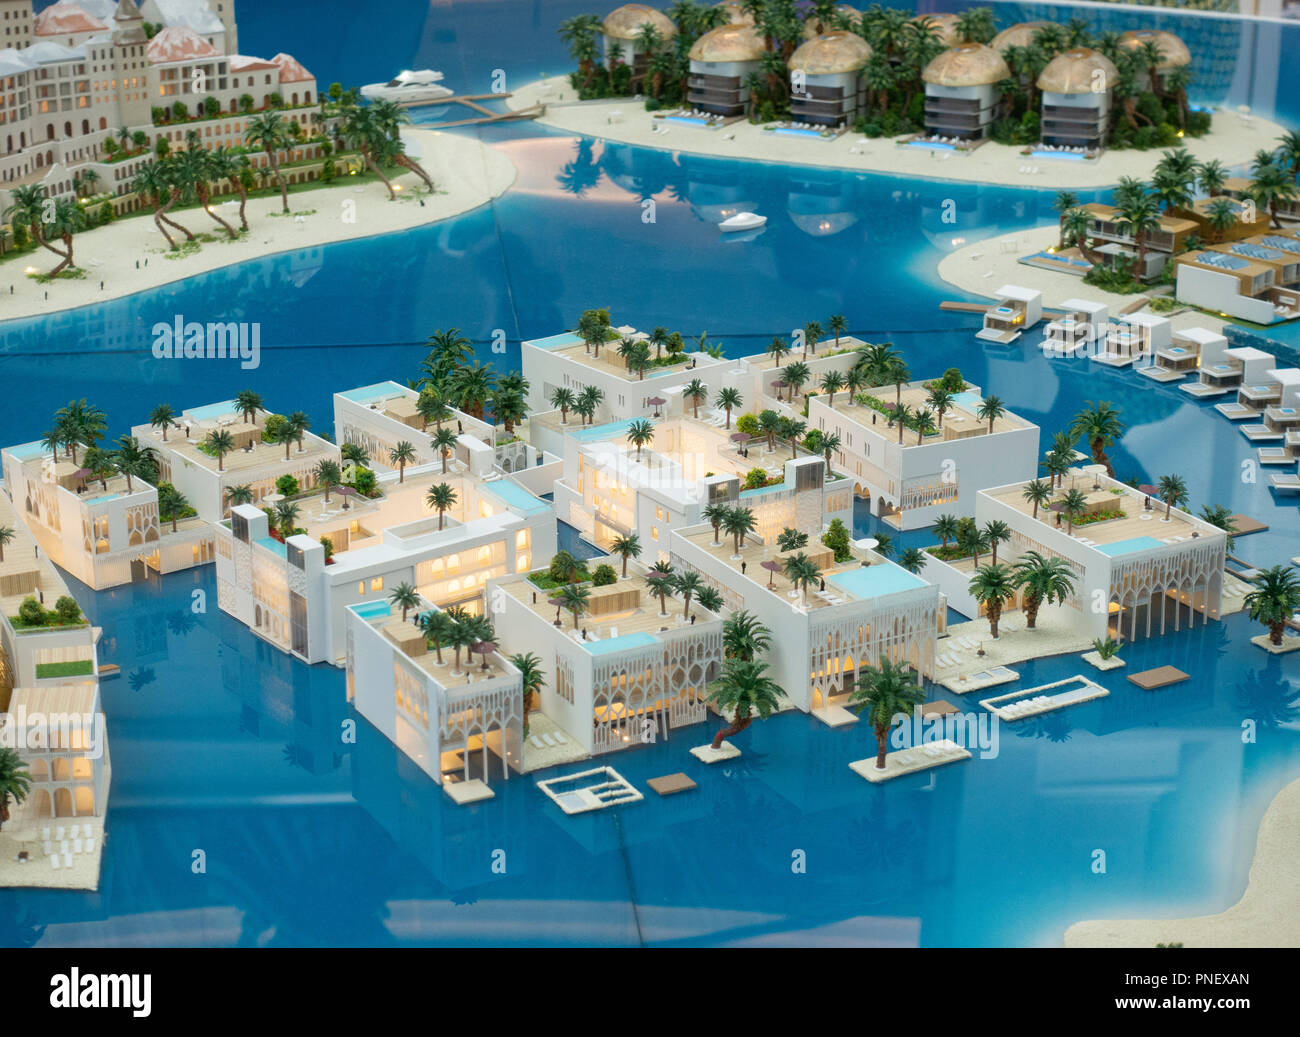 Model of proposed new property development called The Heart of Europe to be built offshore at The World in Dubai, UAE. Development is aimed at investo Stock Photo